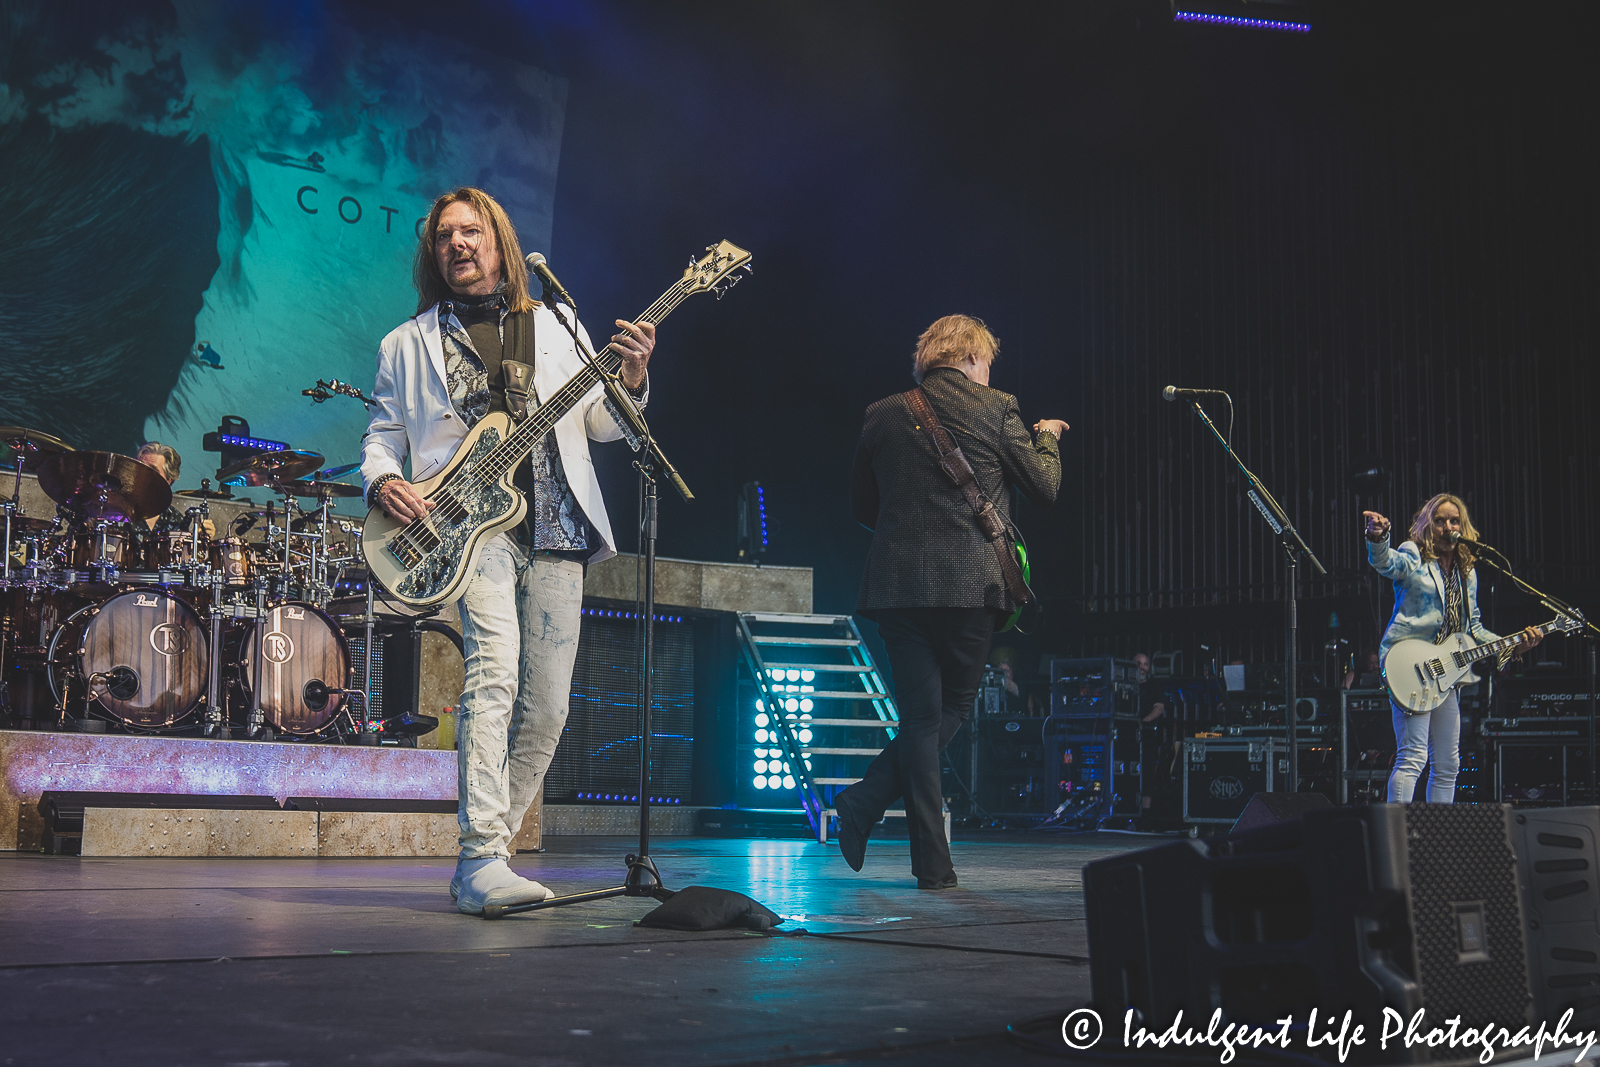 Styx bass guitarist Ricky Phillips playing live with Todd Sucherman, James "J.Y." Young and Tommy Shaw at Starlight Theatre in Kansas City, MO on June 14, 2022.